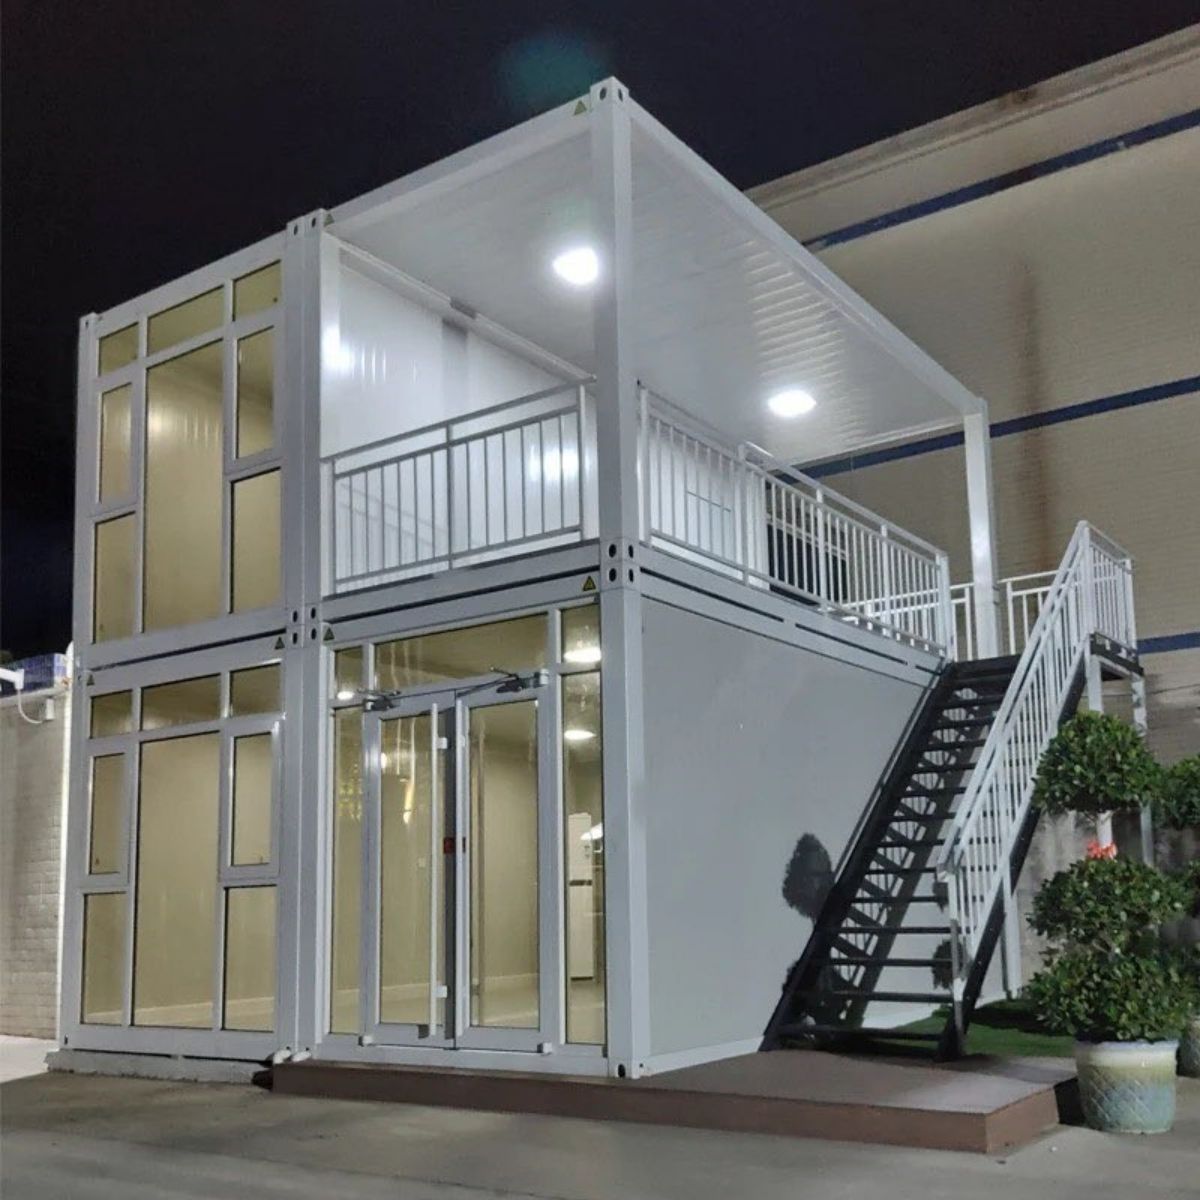 Expandable Container Houses: The Future of Housing